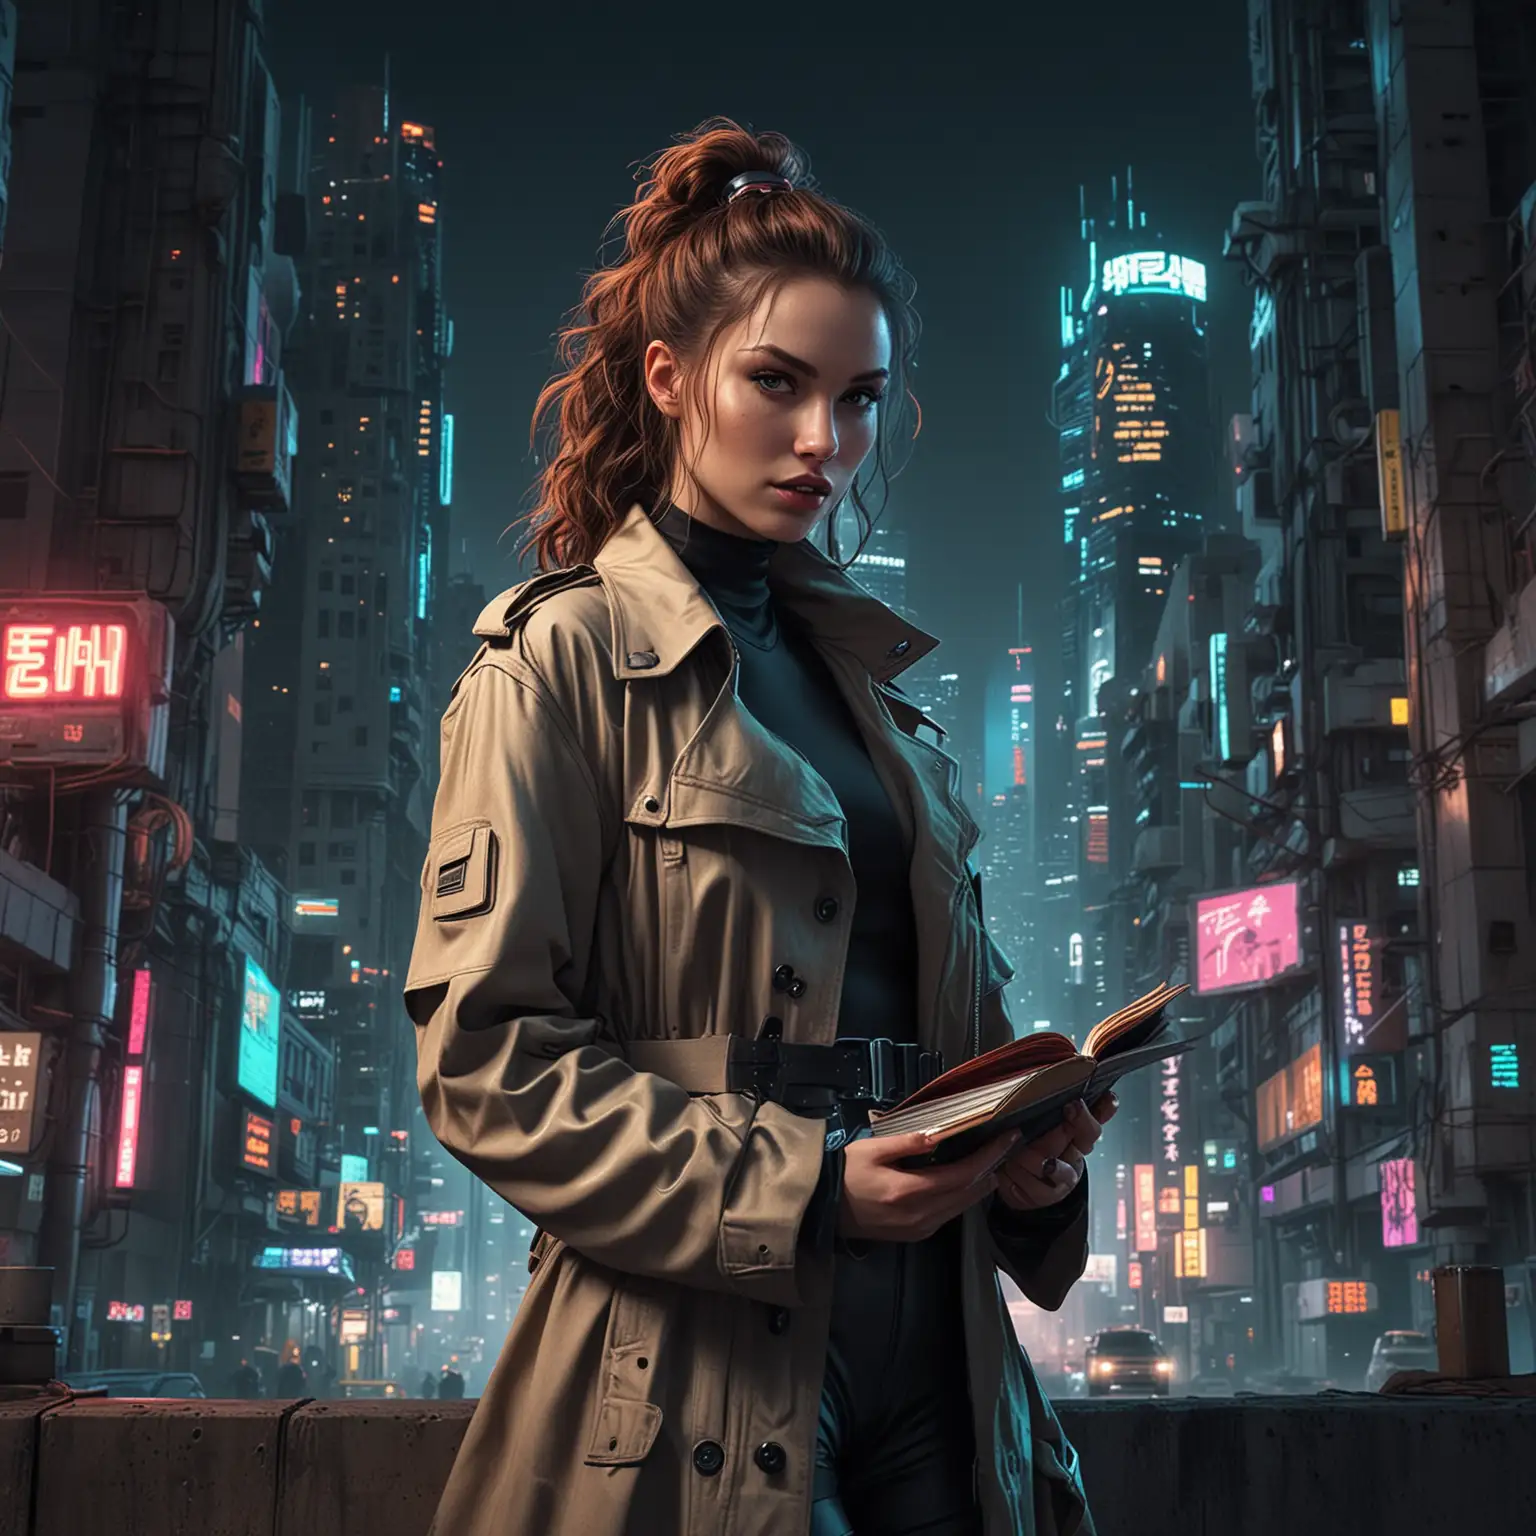 Futuristic Cyberpunk City in Moonlit Canyon with Rebel Woman and Books